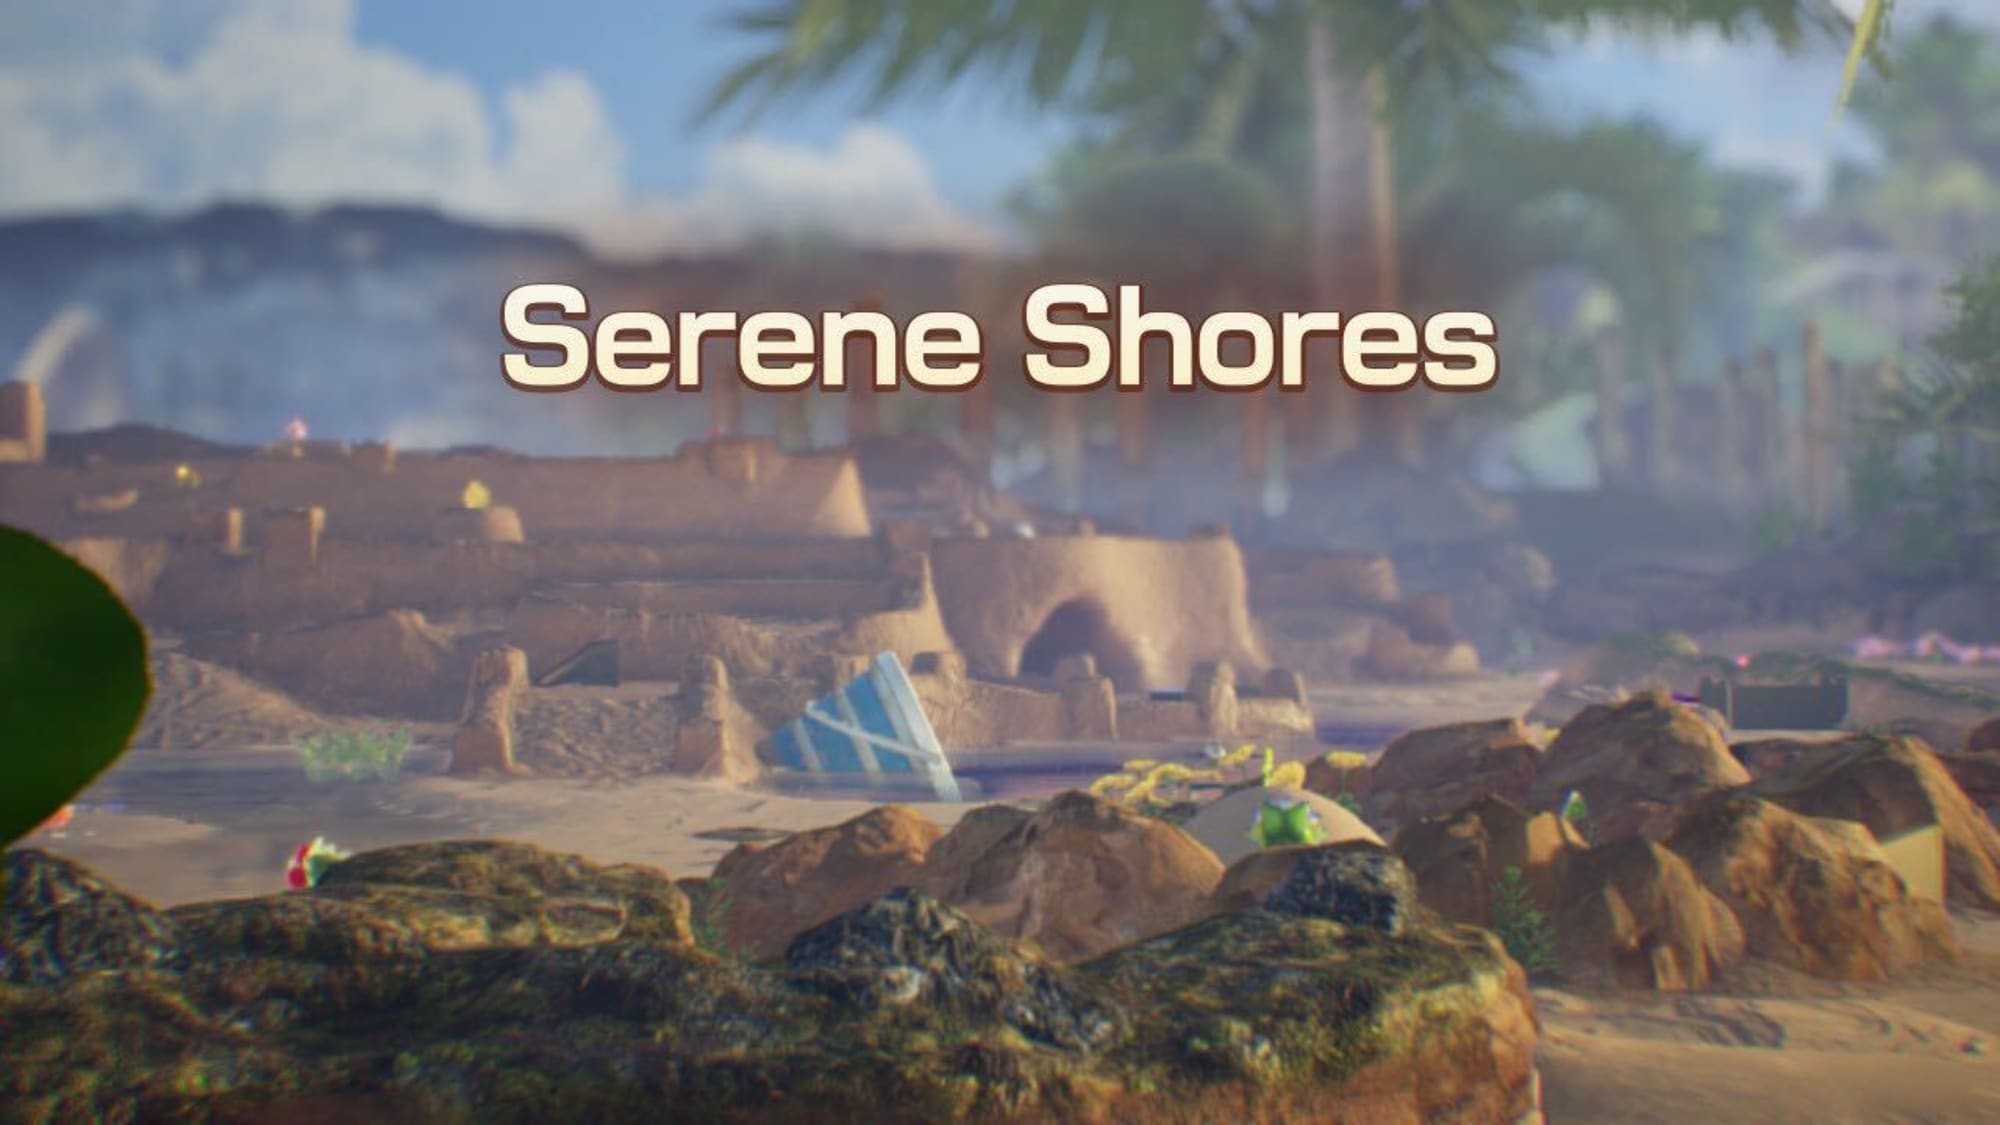 A rocky beach setting with the title Serene Shores.